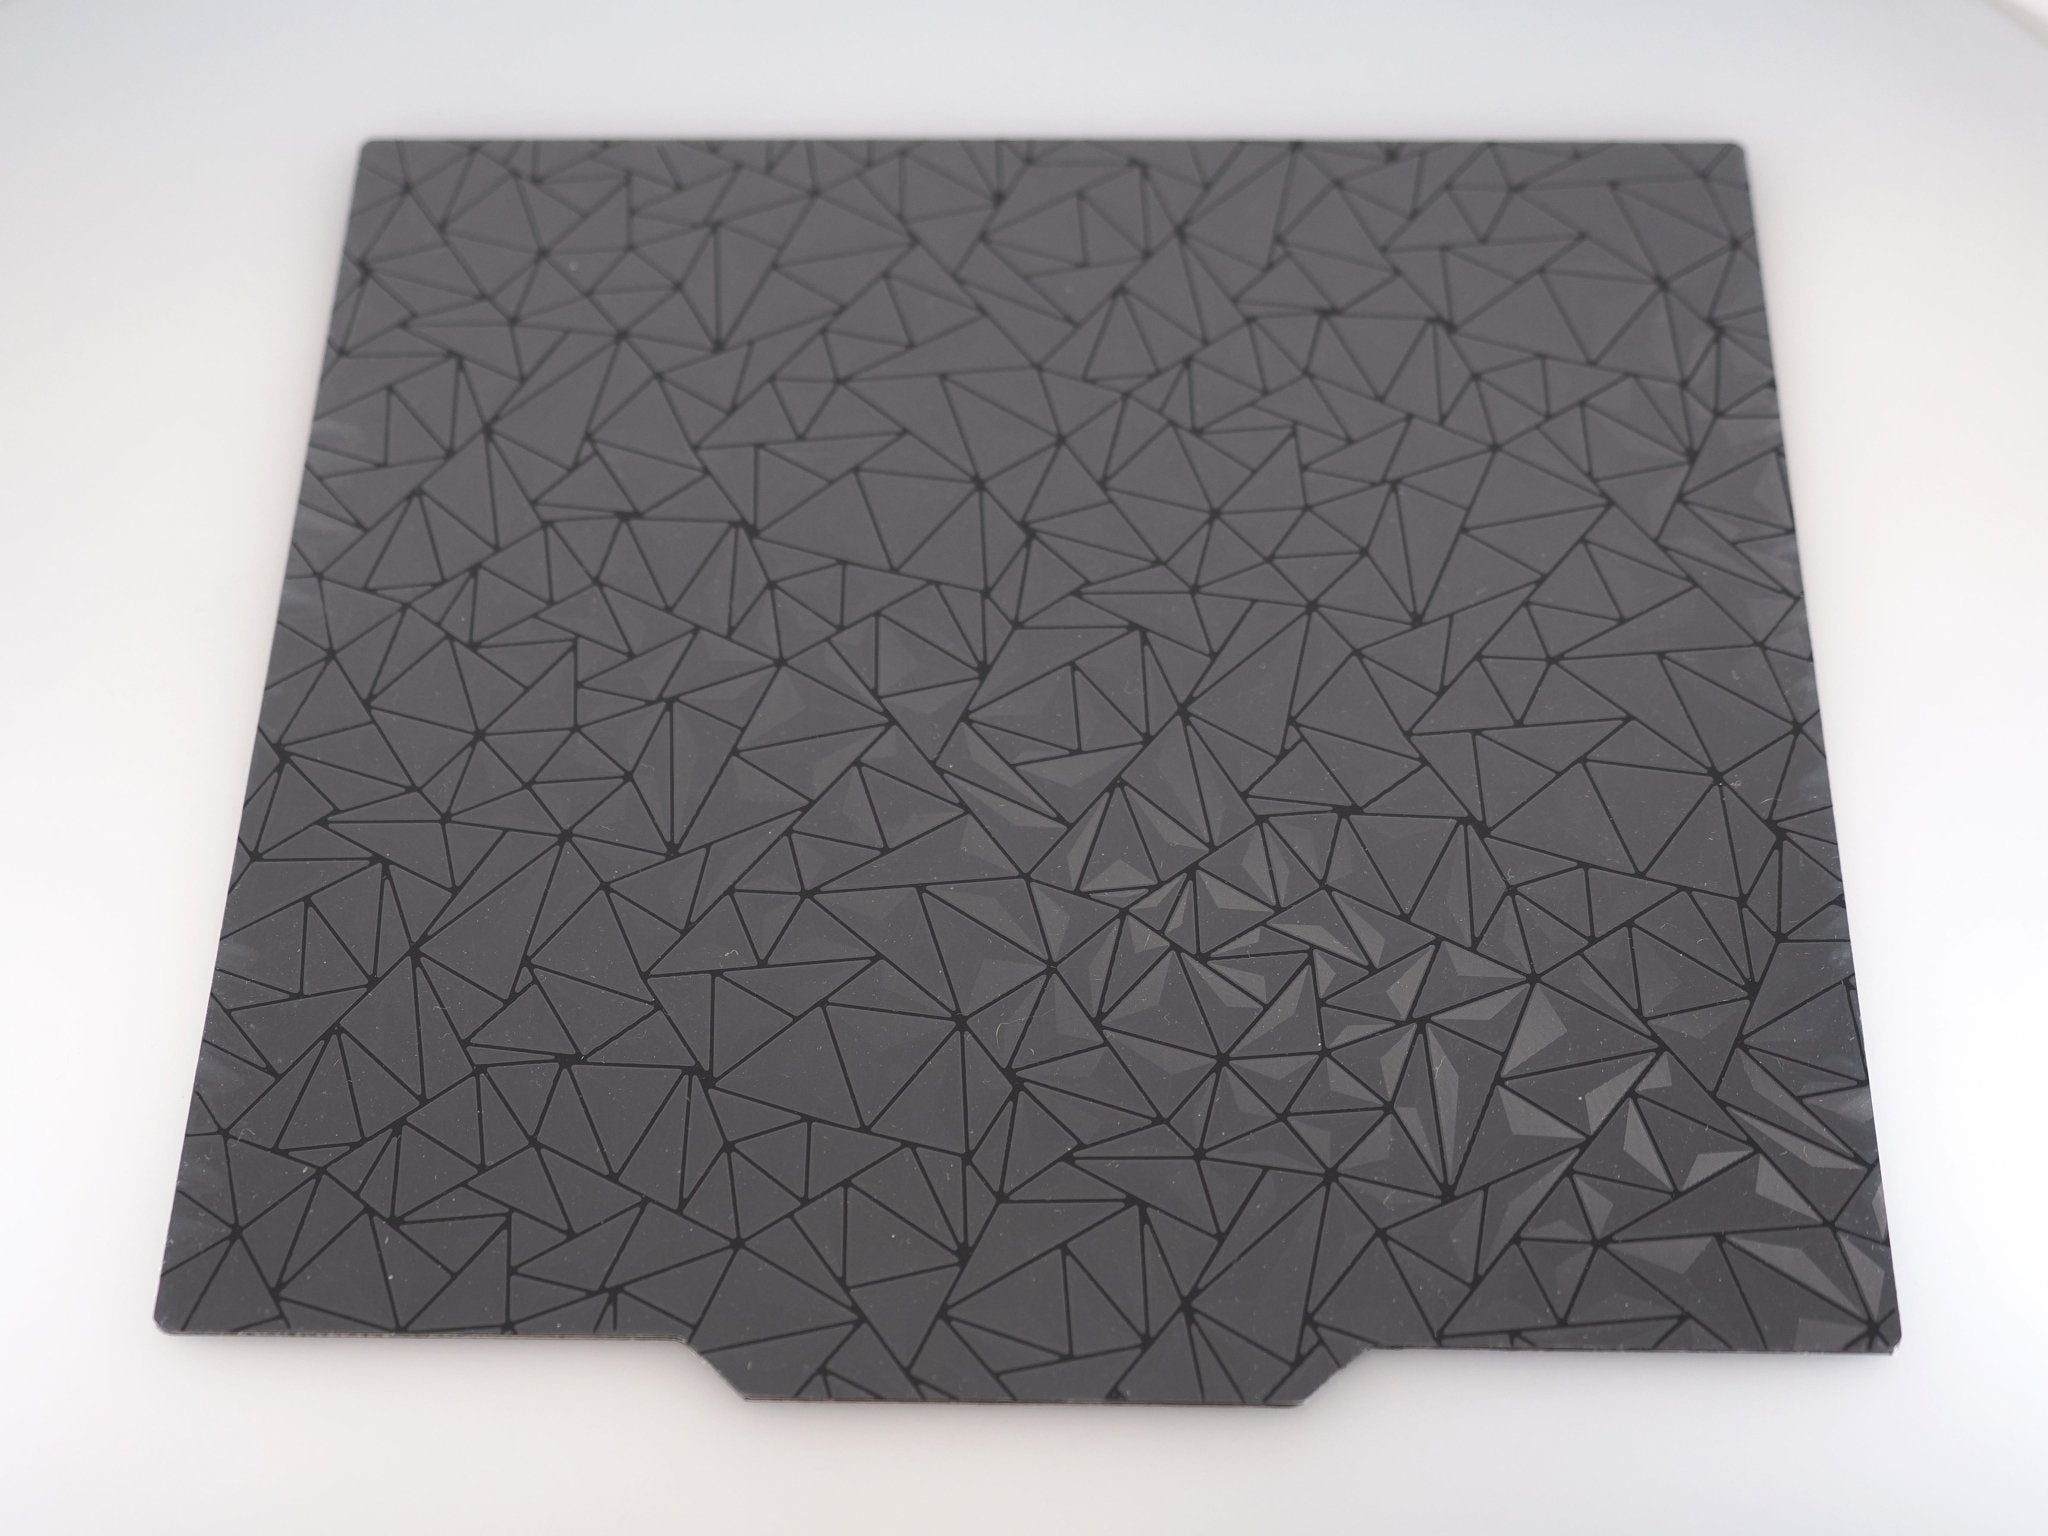 PEO / Black PEI Performance Double Sided Flex Plates - West3D 3D Printing Supplies - West3D Printing